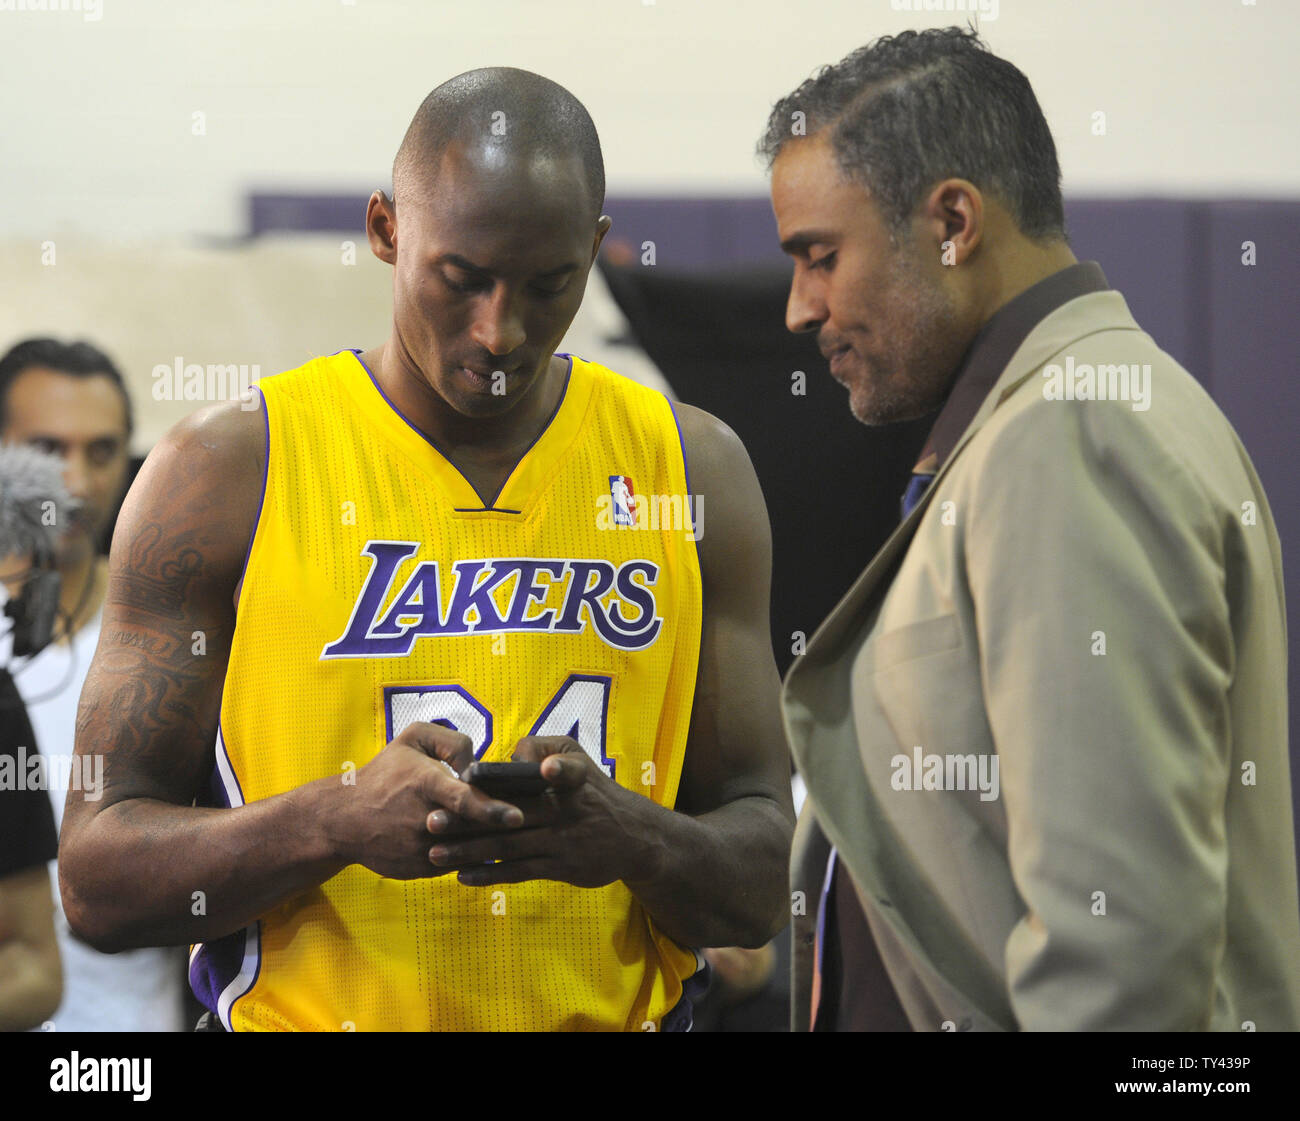 Rick Fox on X: Let's Get It @Lakers Number 17 !!!